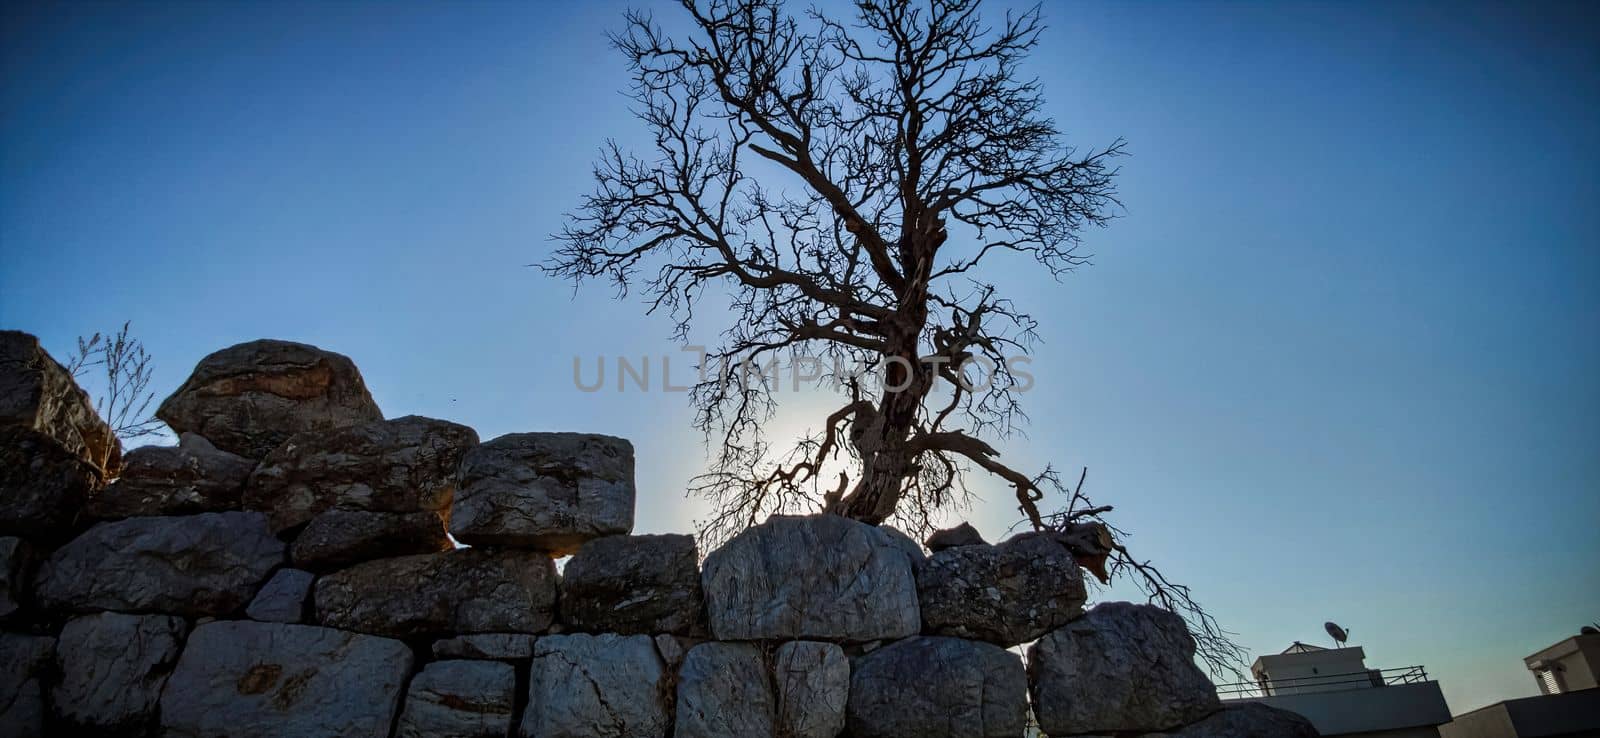 Tree branches on sky background, Tree Silhouette on the stones. download image by igor010